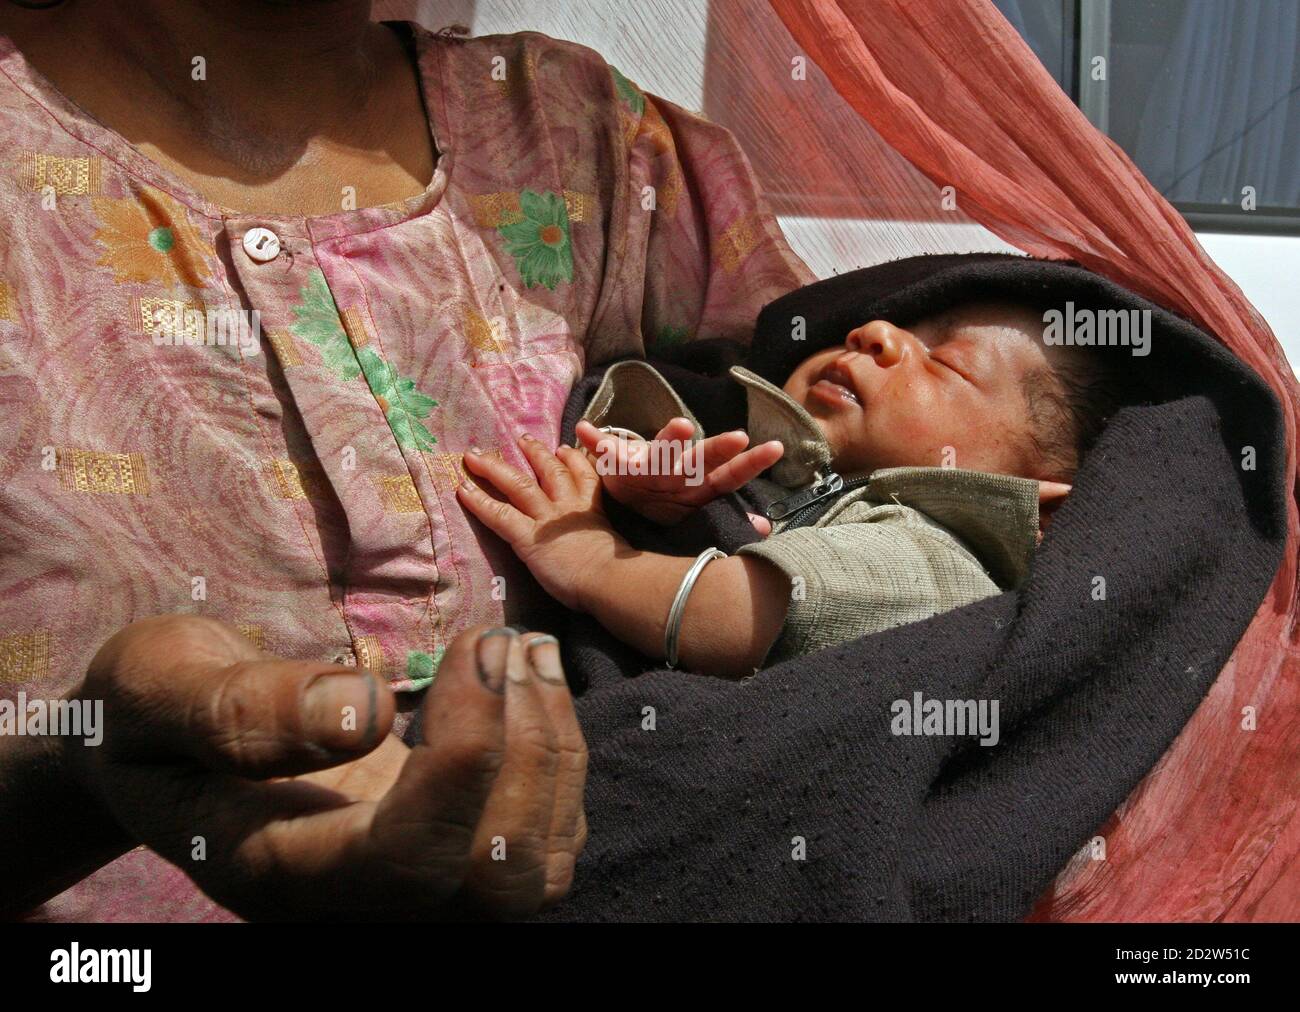 An Indian homeless woman waits for alms at a traffic intersection as she  holds a newborn baby in New Delhi March 26, 2006. [The Indian economy's  growth rate has kept an average